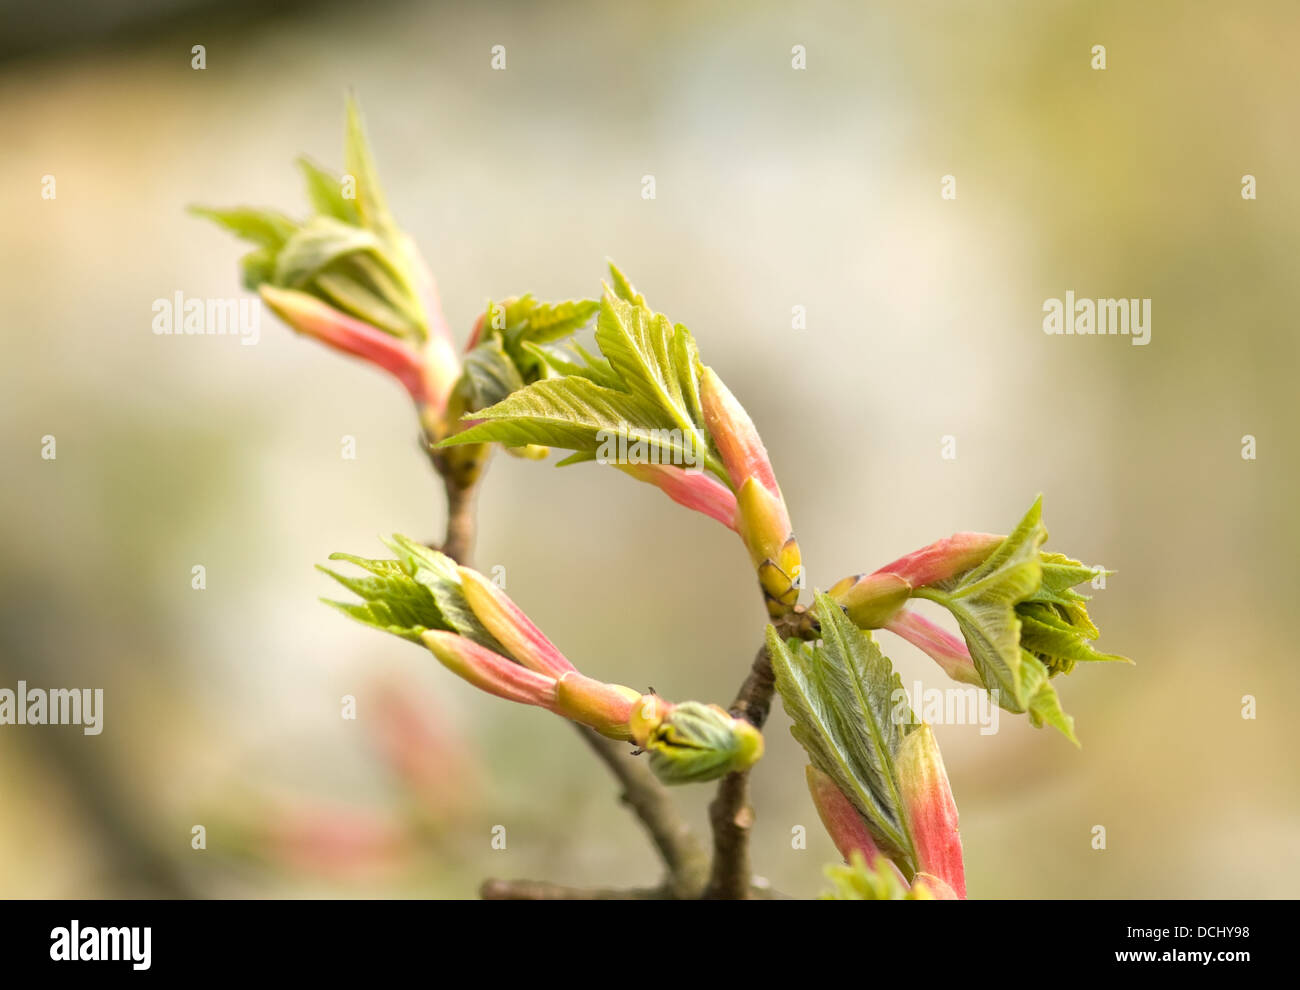 maple tree branch with spring buds and young leaves, macro Stock Photo